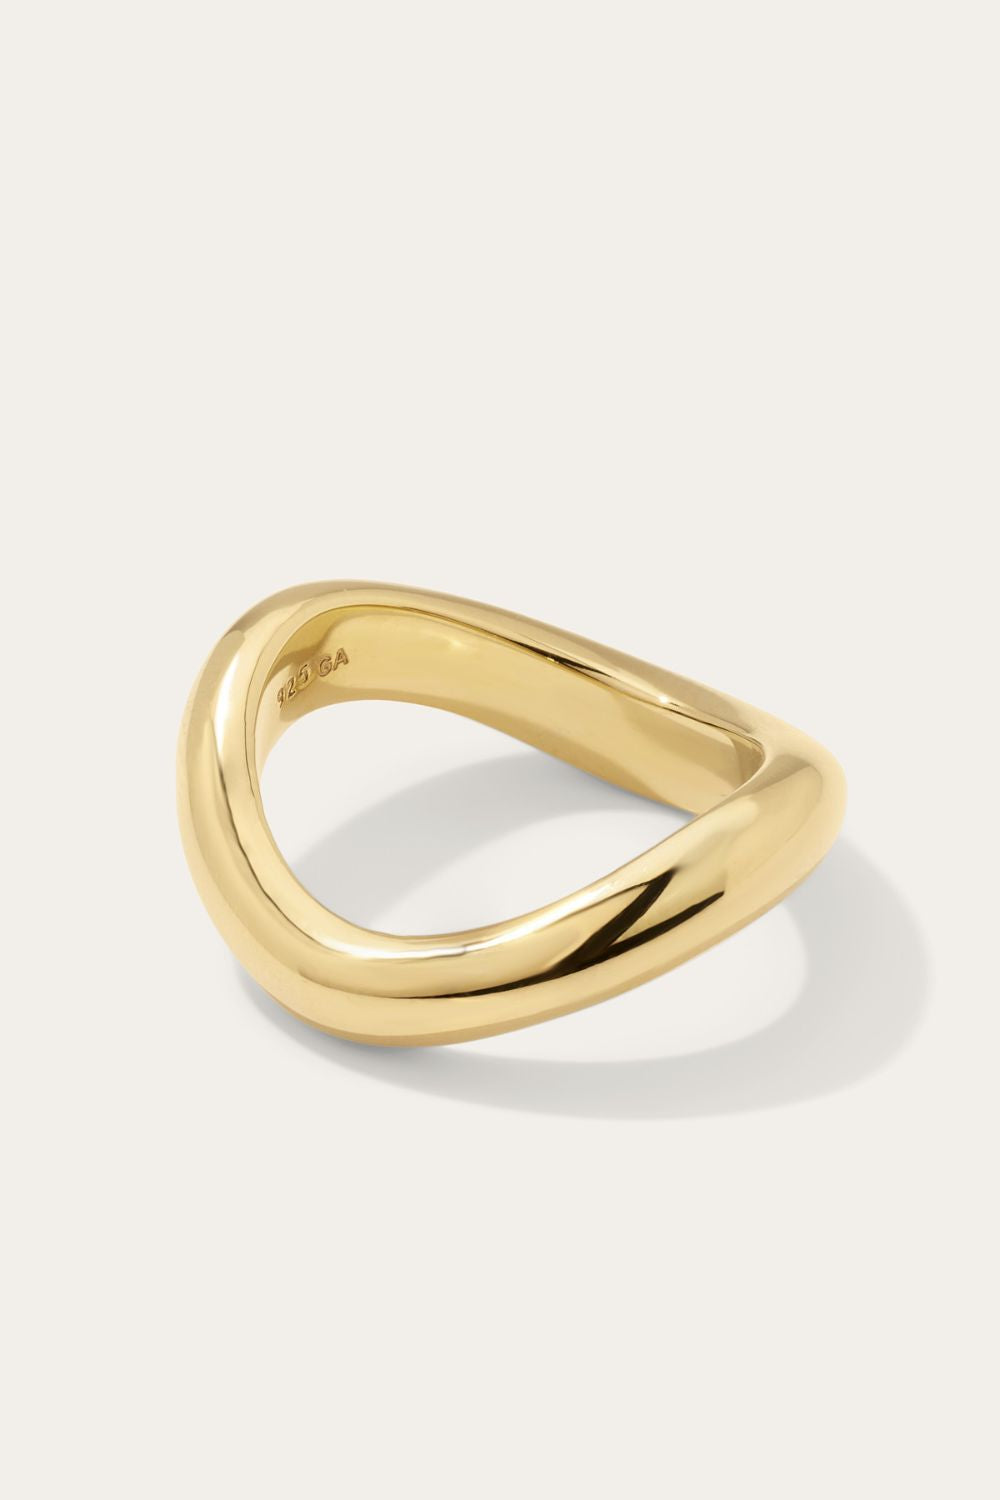 Kyma Gold Ring For Women | Kyma Jewels | Galleria Armadoro